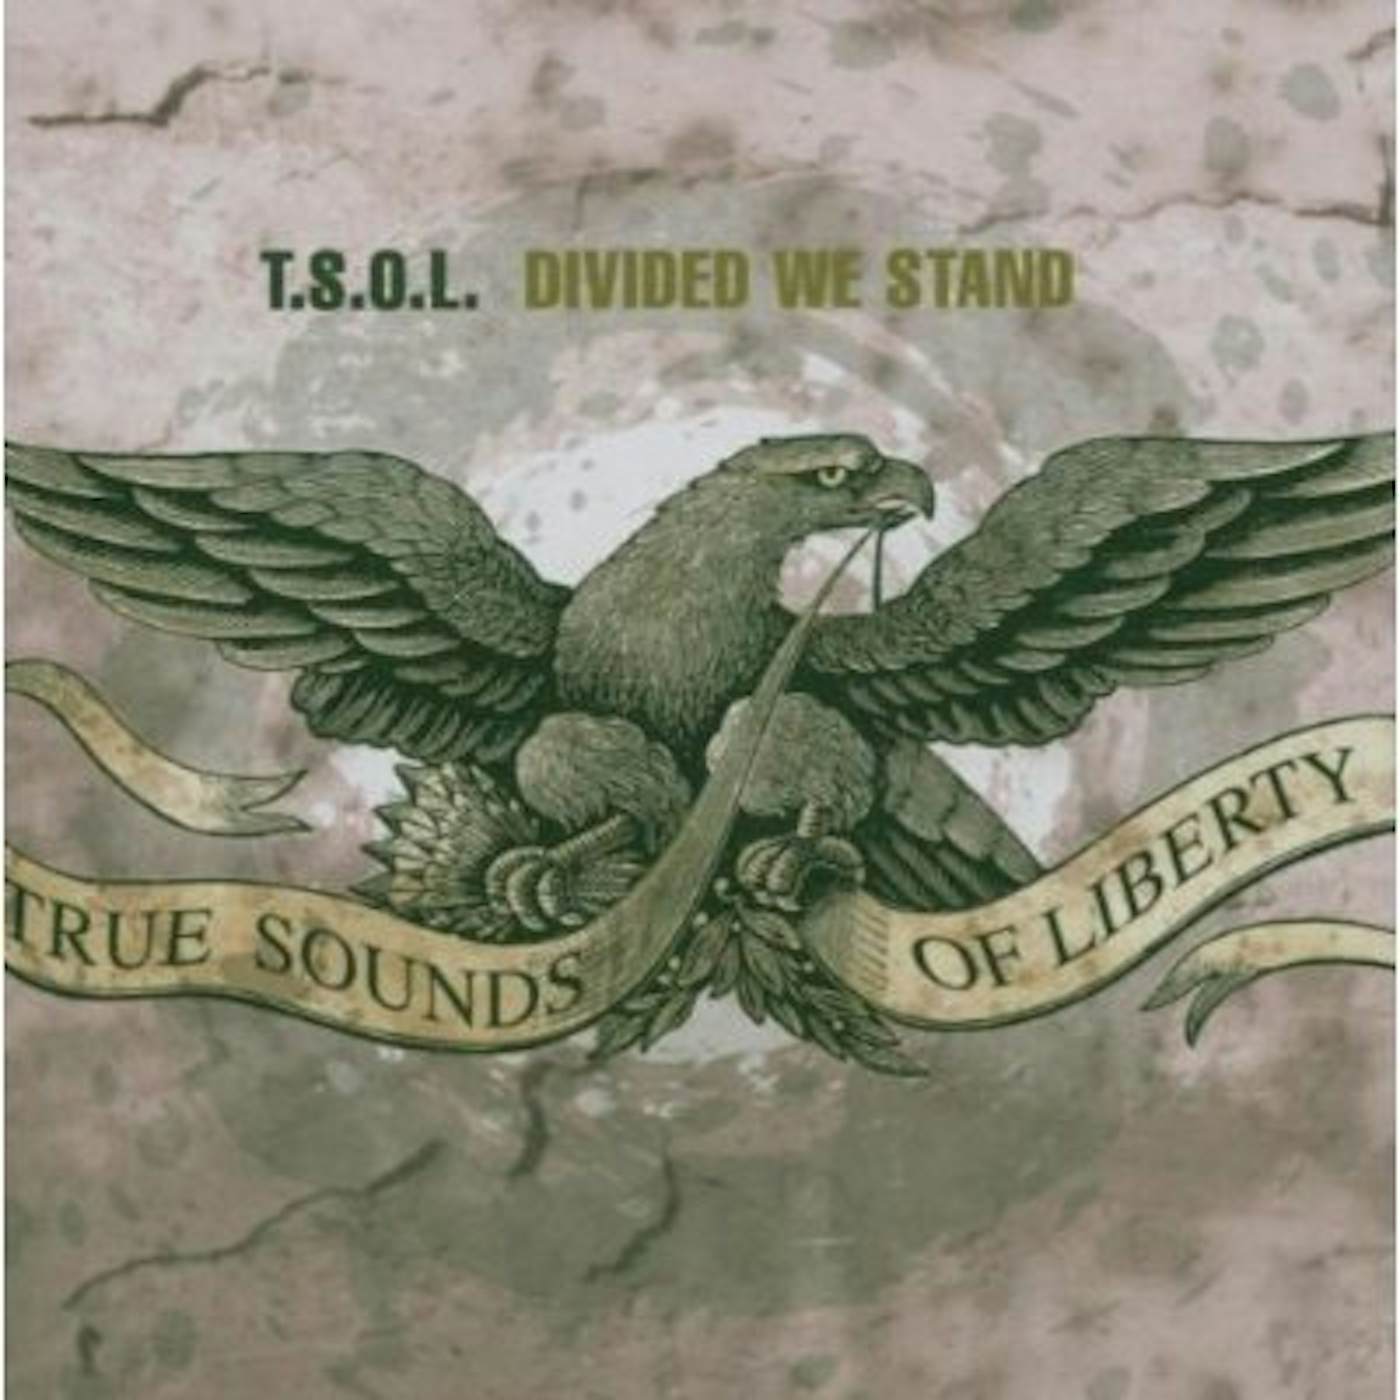 T.S.O.L. DIVIDED WE STAND CD